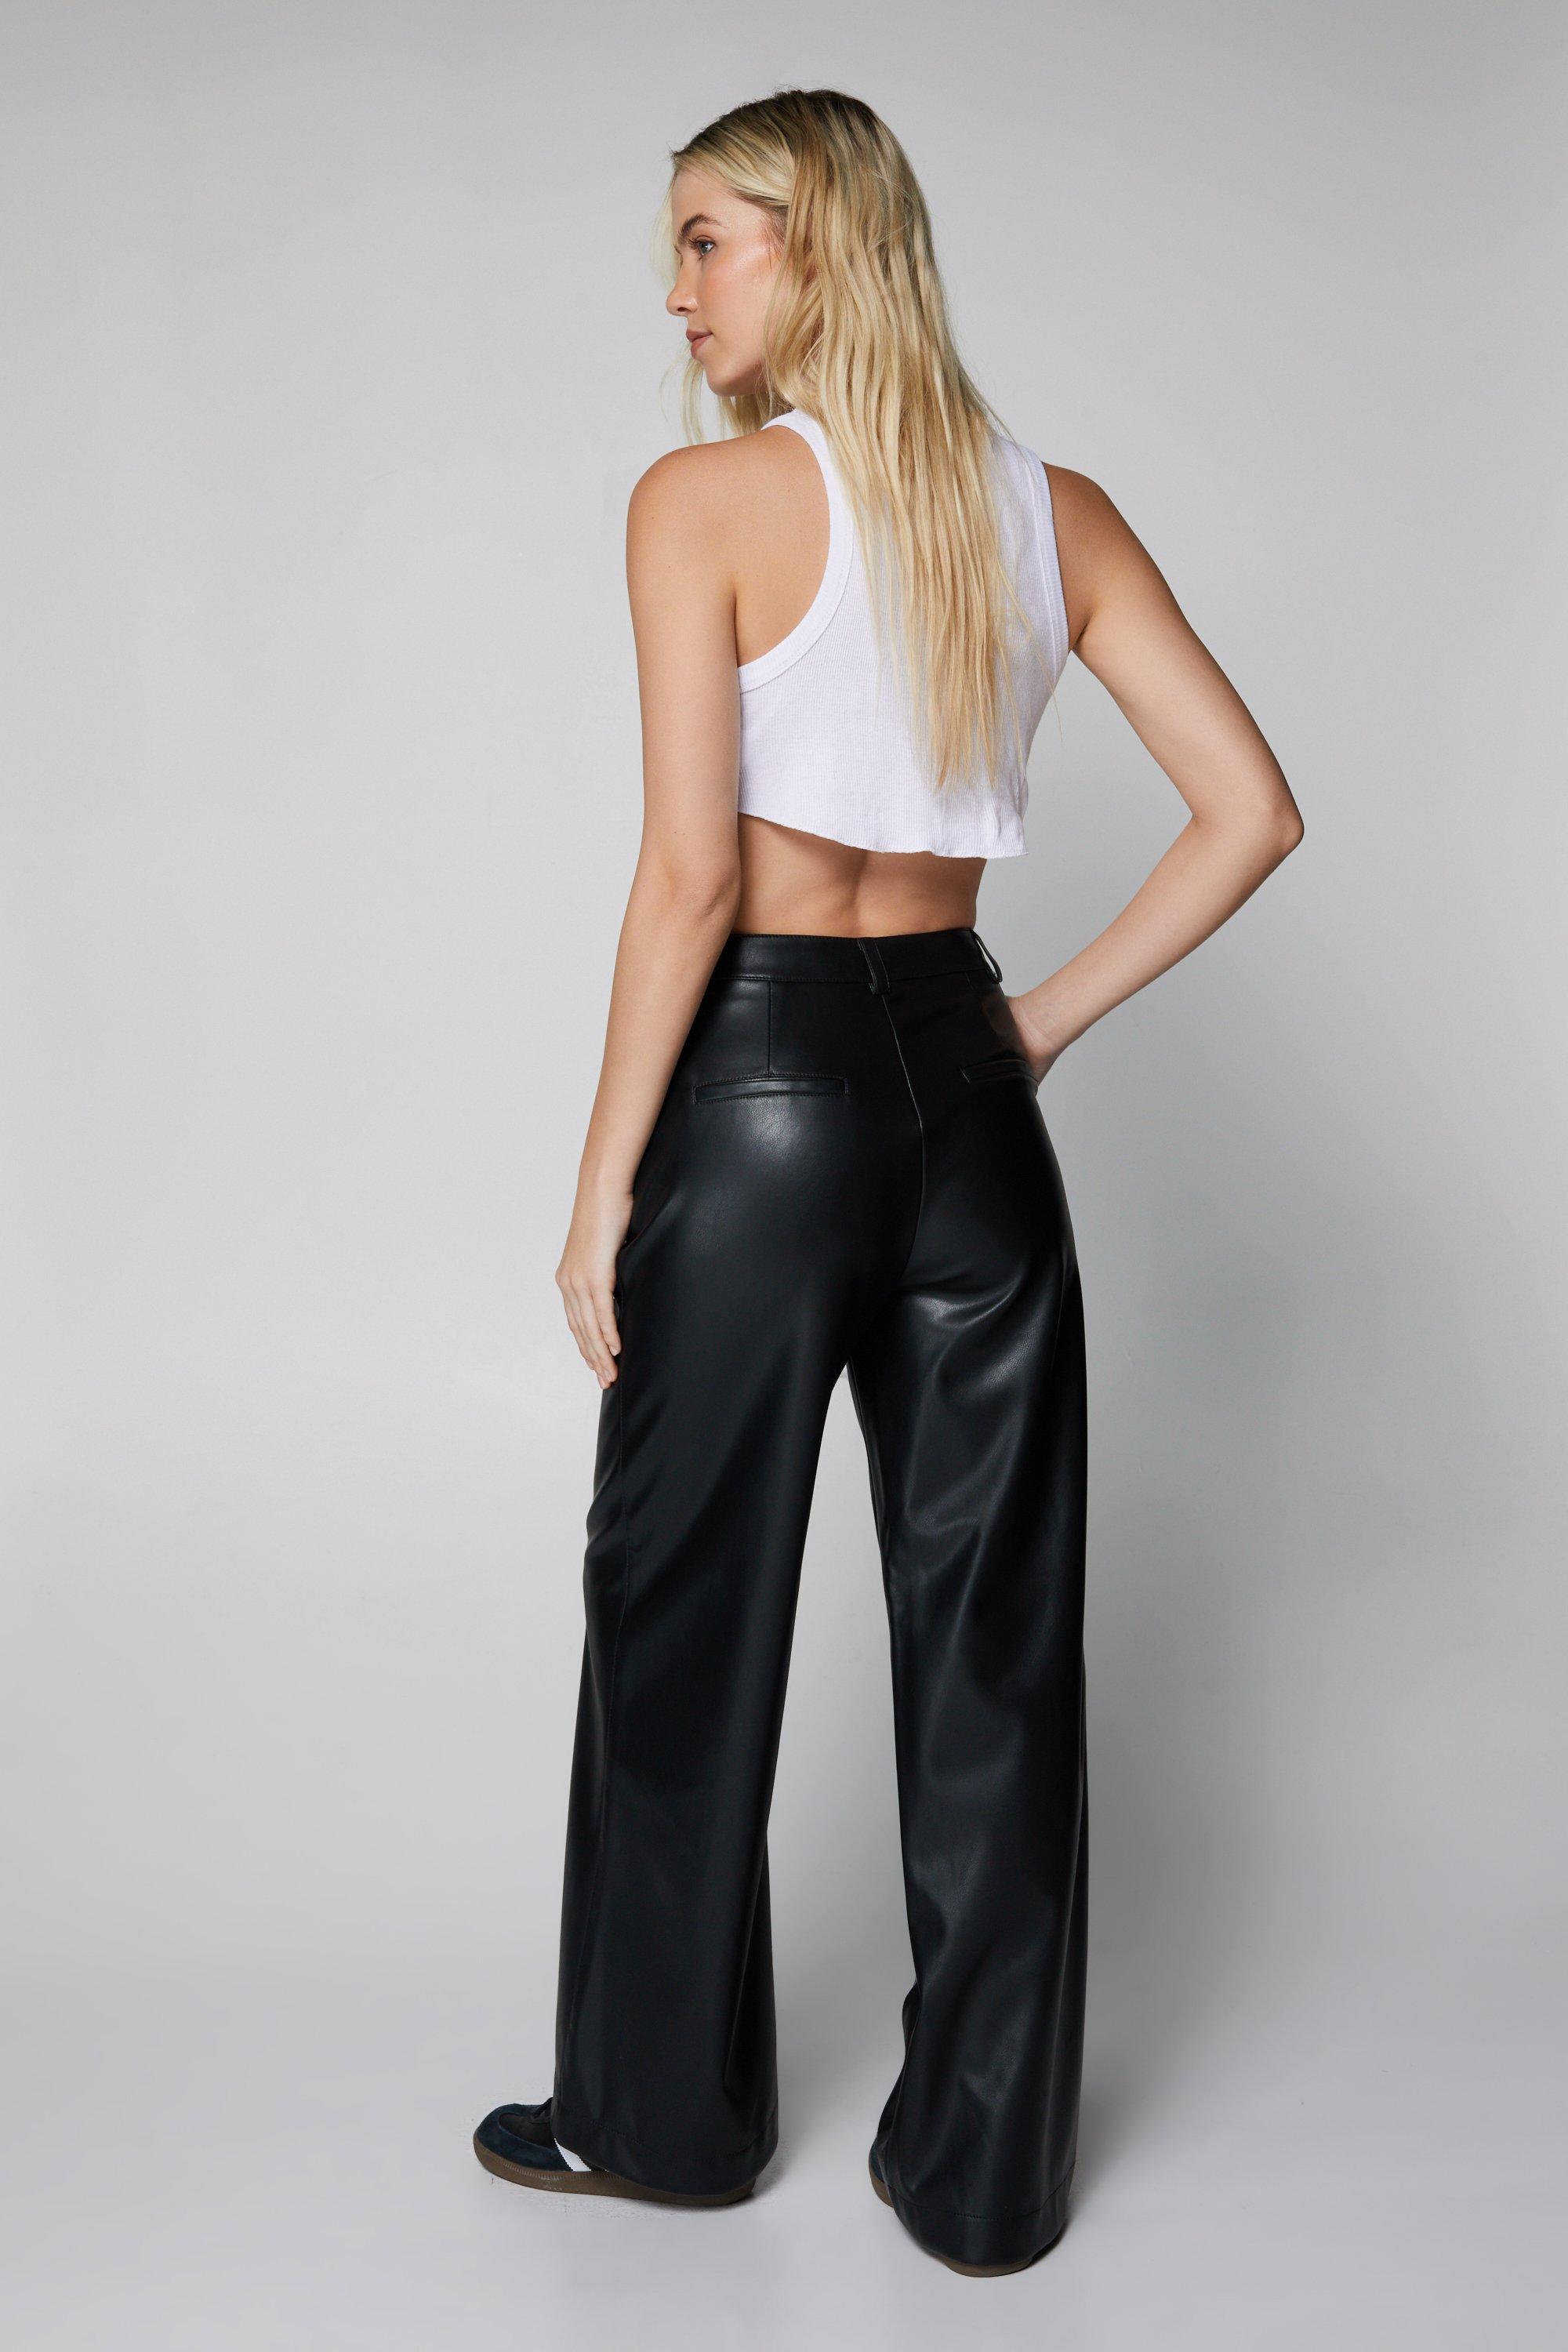 Nasty Gal Womens Petite Plisse High Waisted Flare Pants - ShopStyle